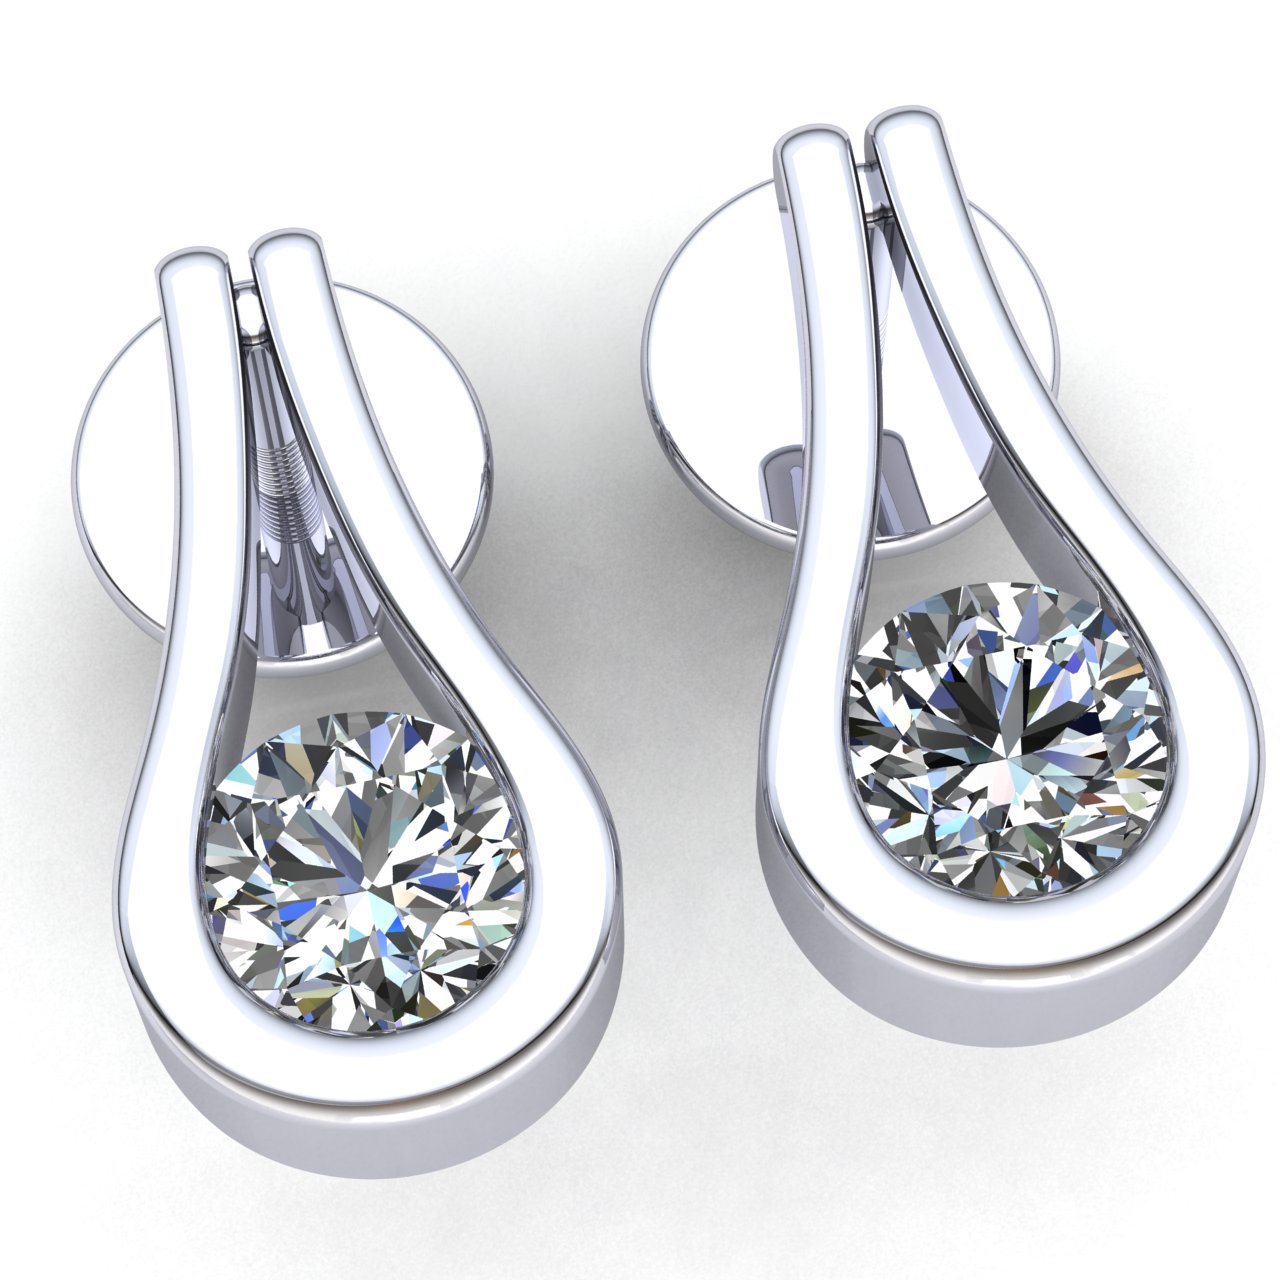 Jewel We Sell Real 1.5carat Round Cut Diamond Ladies U Drop Solitaire Stud Earrings Solid 18K White, Yellow, or Rose Gold F VS1